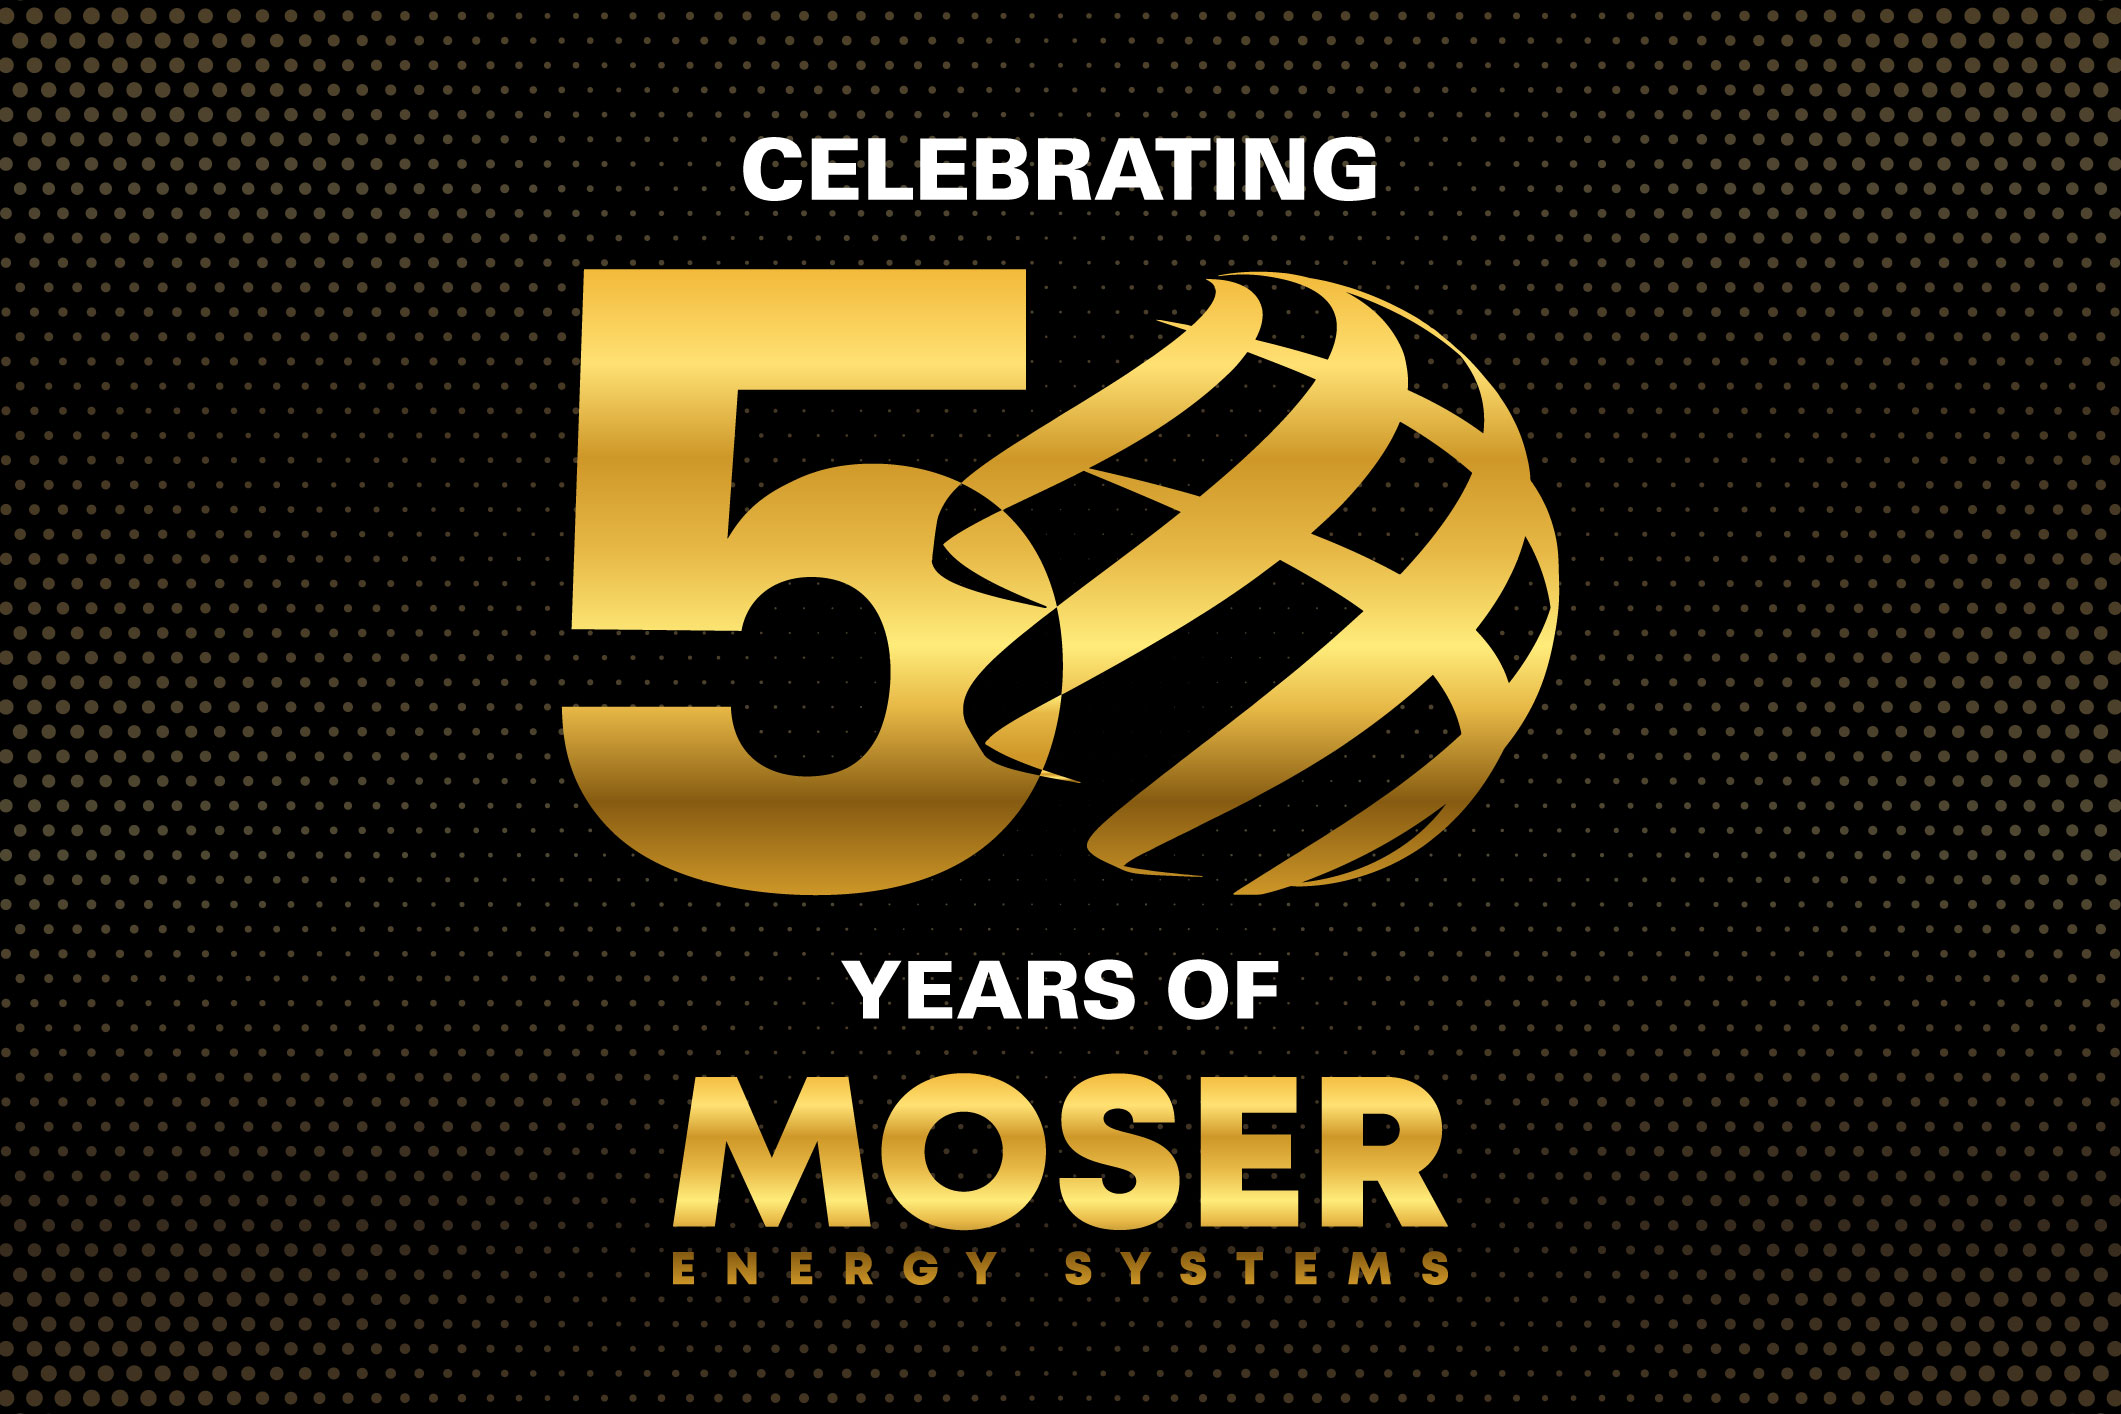 Celebrating 50 years of Moser